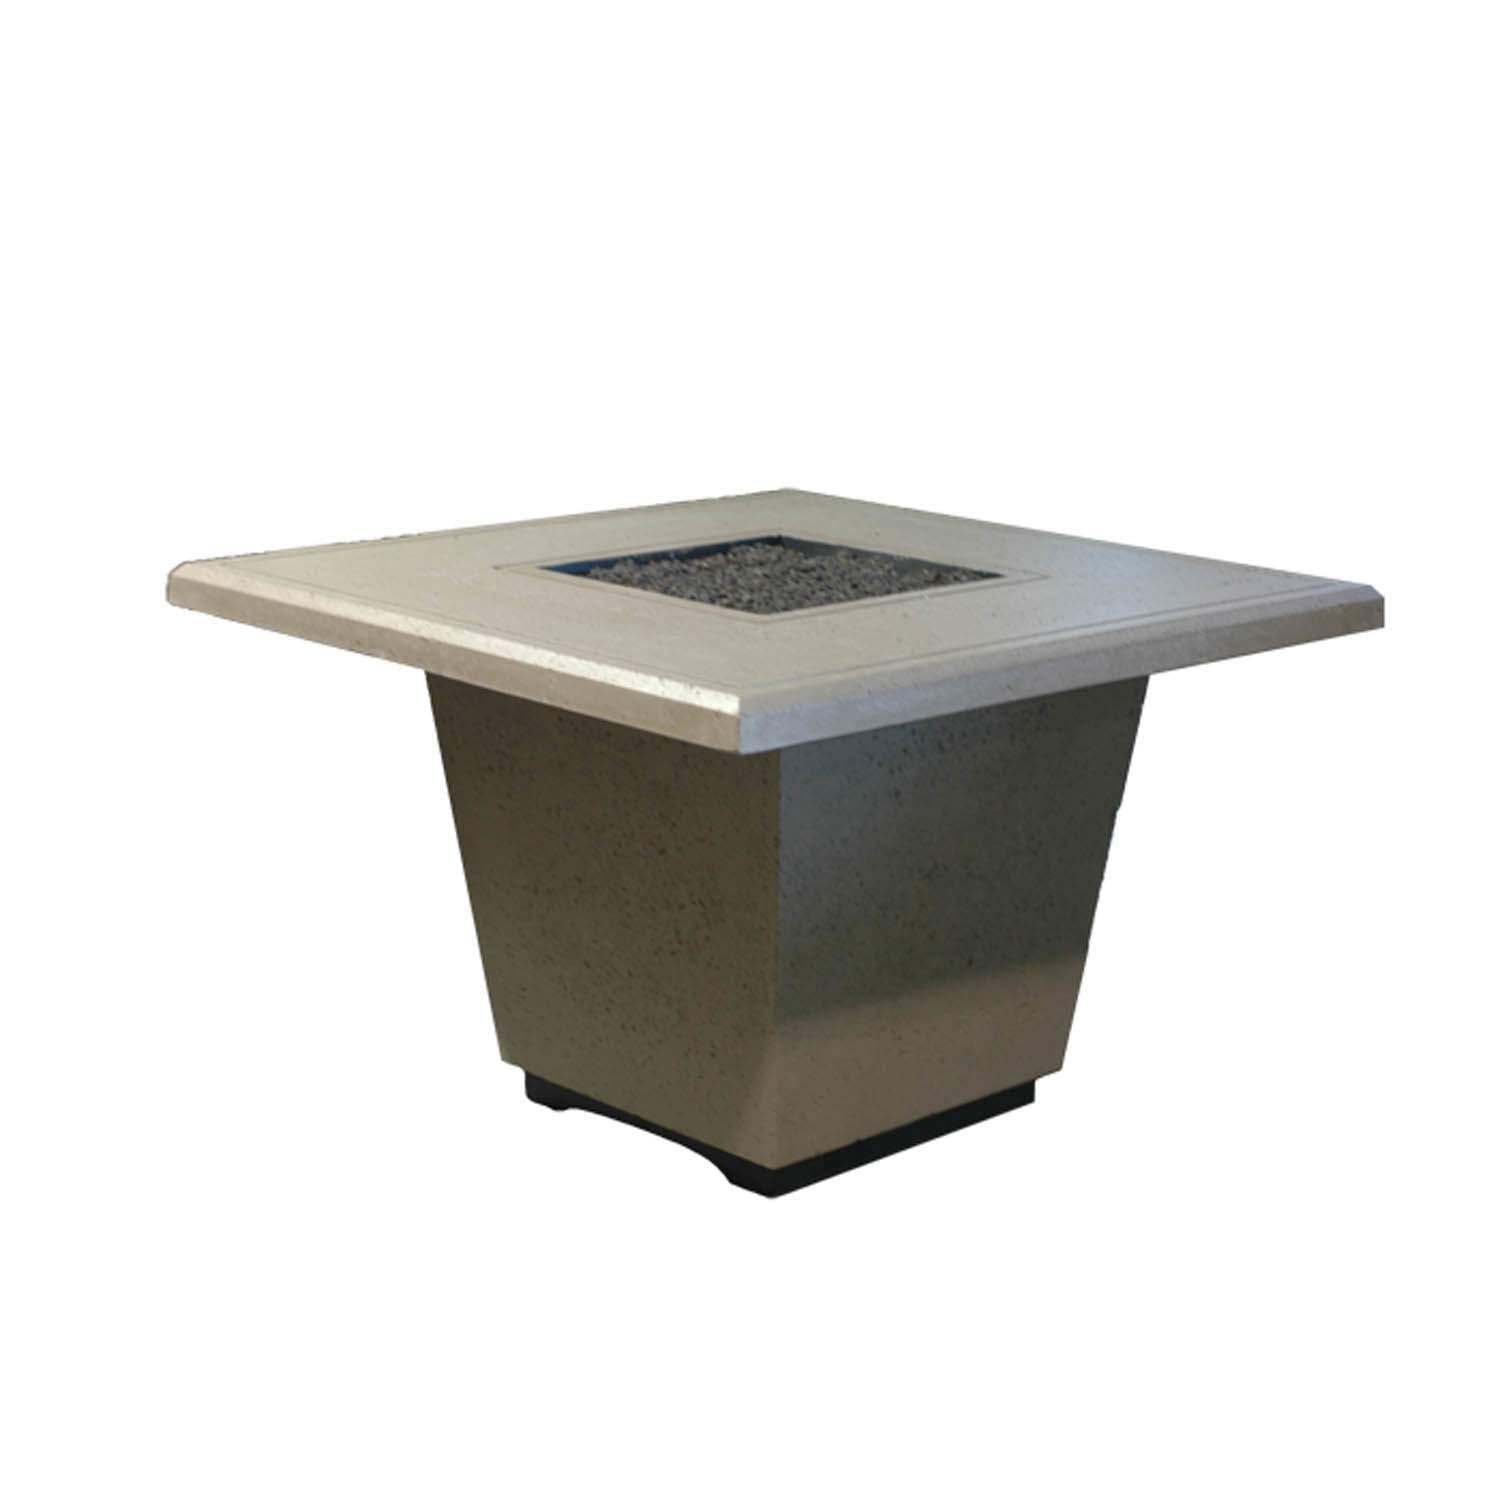 American Fyre Designs Fire Table American Fyre Designs - Cosmopolitan Chat Height Fire Table, Square